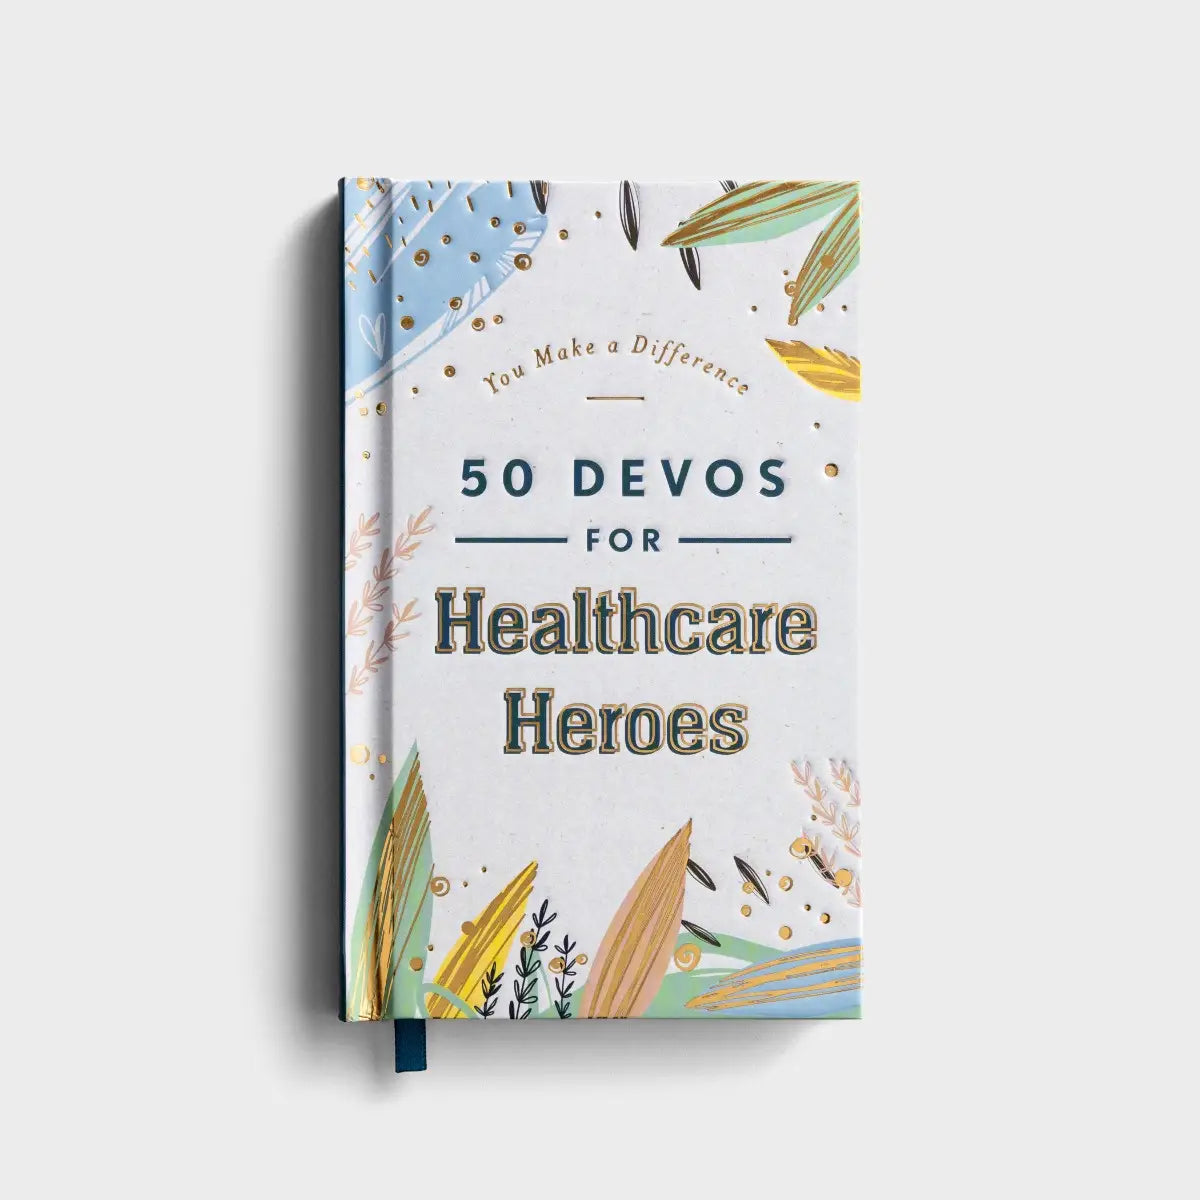 Daysprings You Make a Difference: 50 Devos for Healthcare Heroes